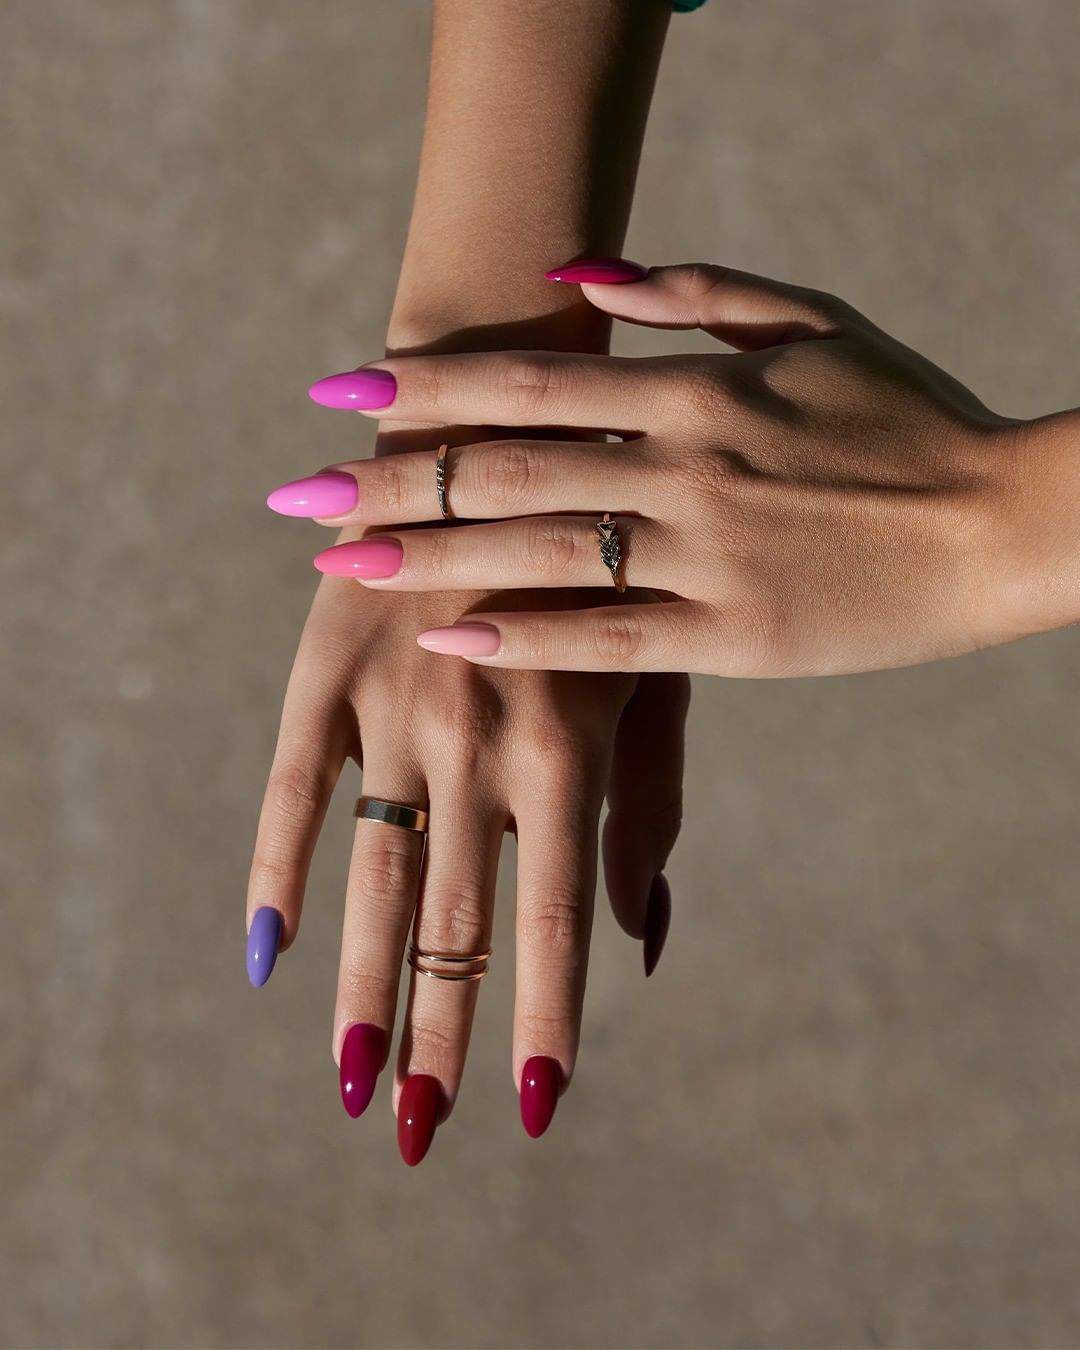 35 Nail Designs For 2022 You’ll Want To Try Immediately images 29